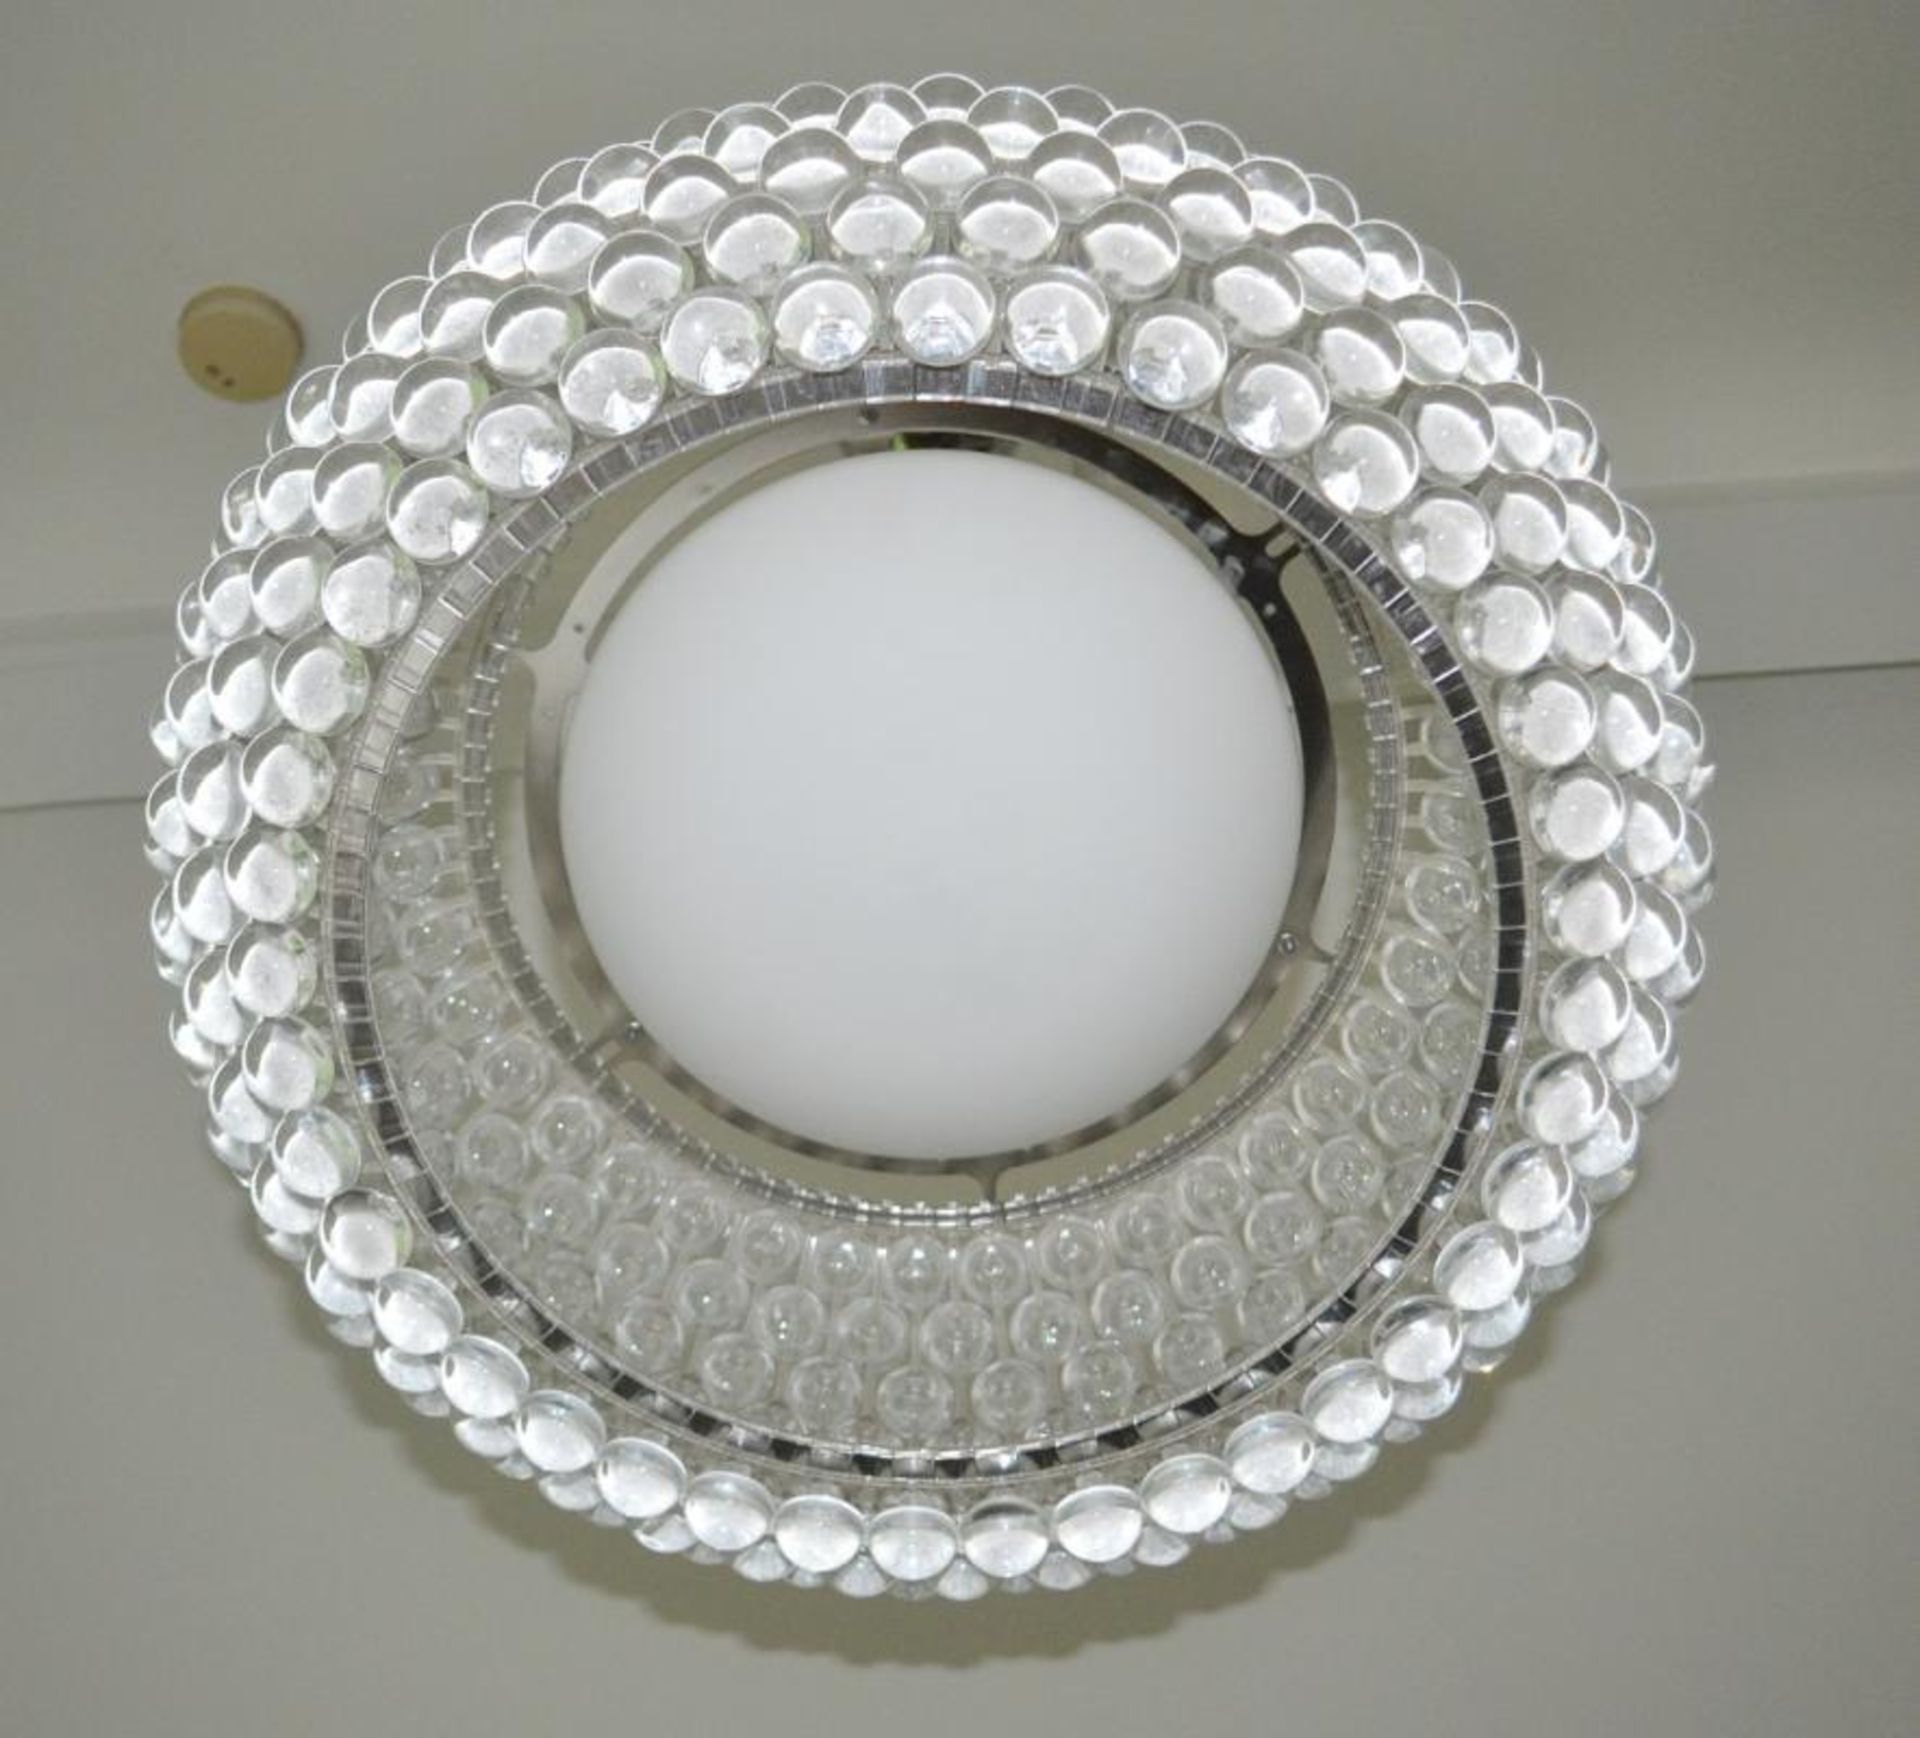 Clear Glass Bubble Light Set - CL439 - Location: Ilkey LS29 - Used In Good Condition - Image 6 of 8